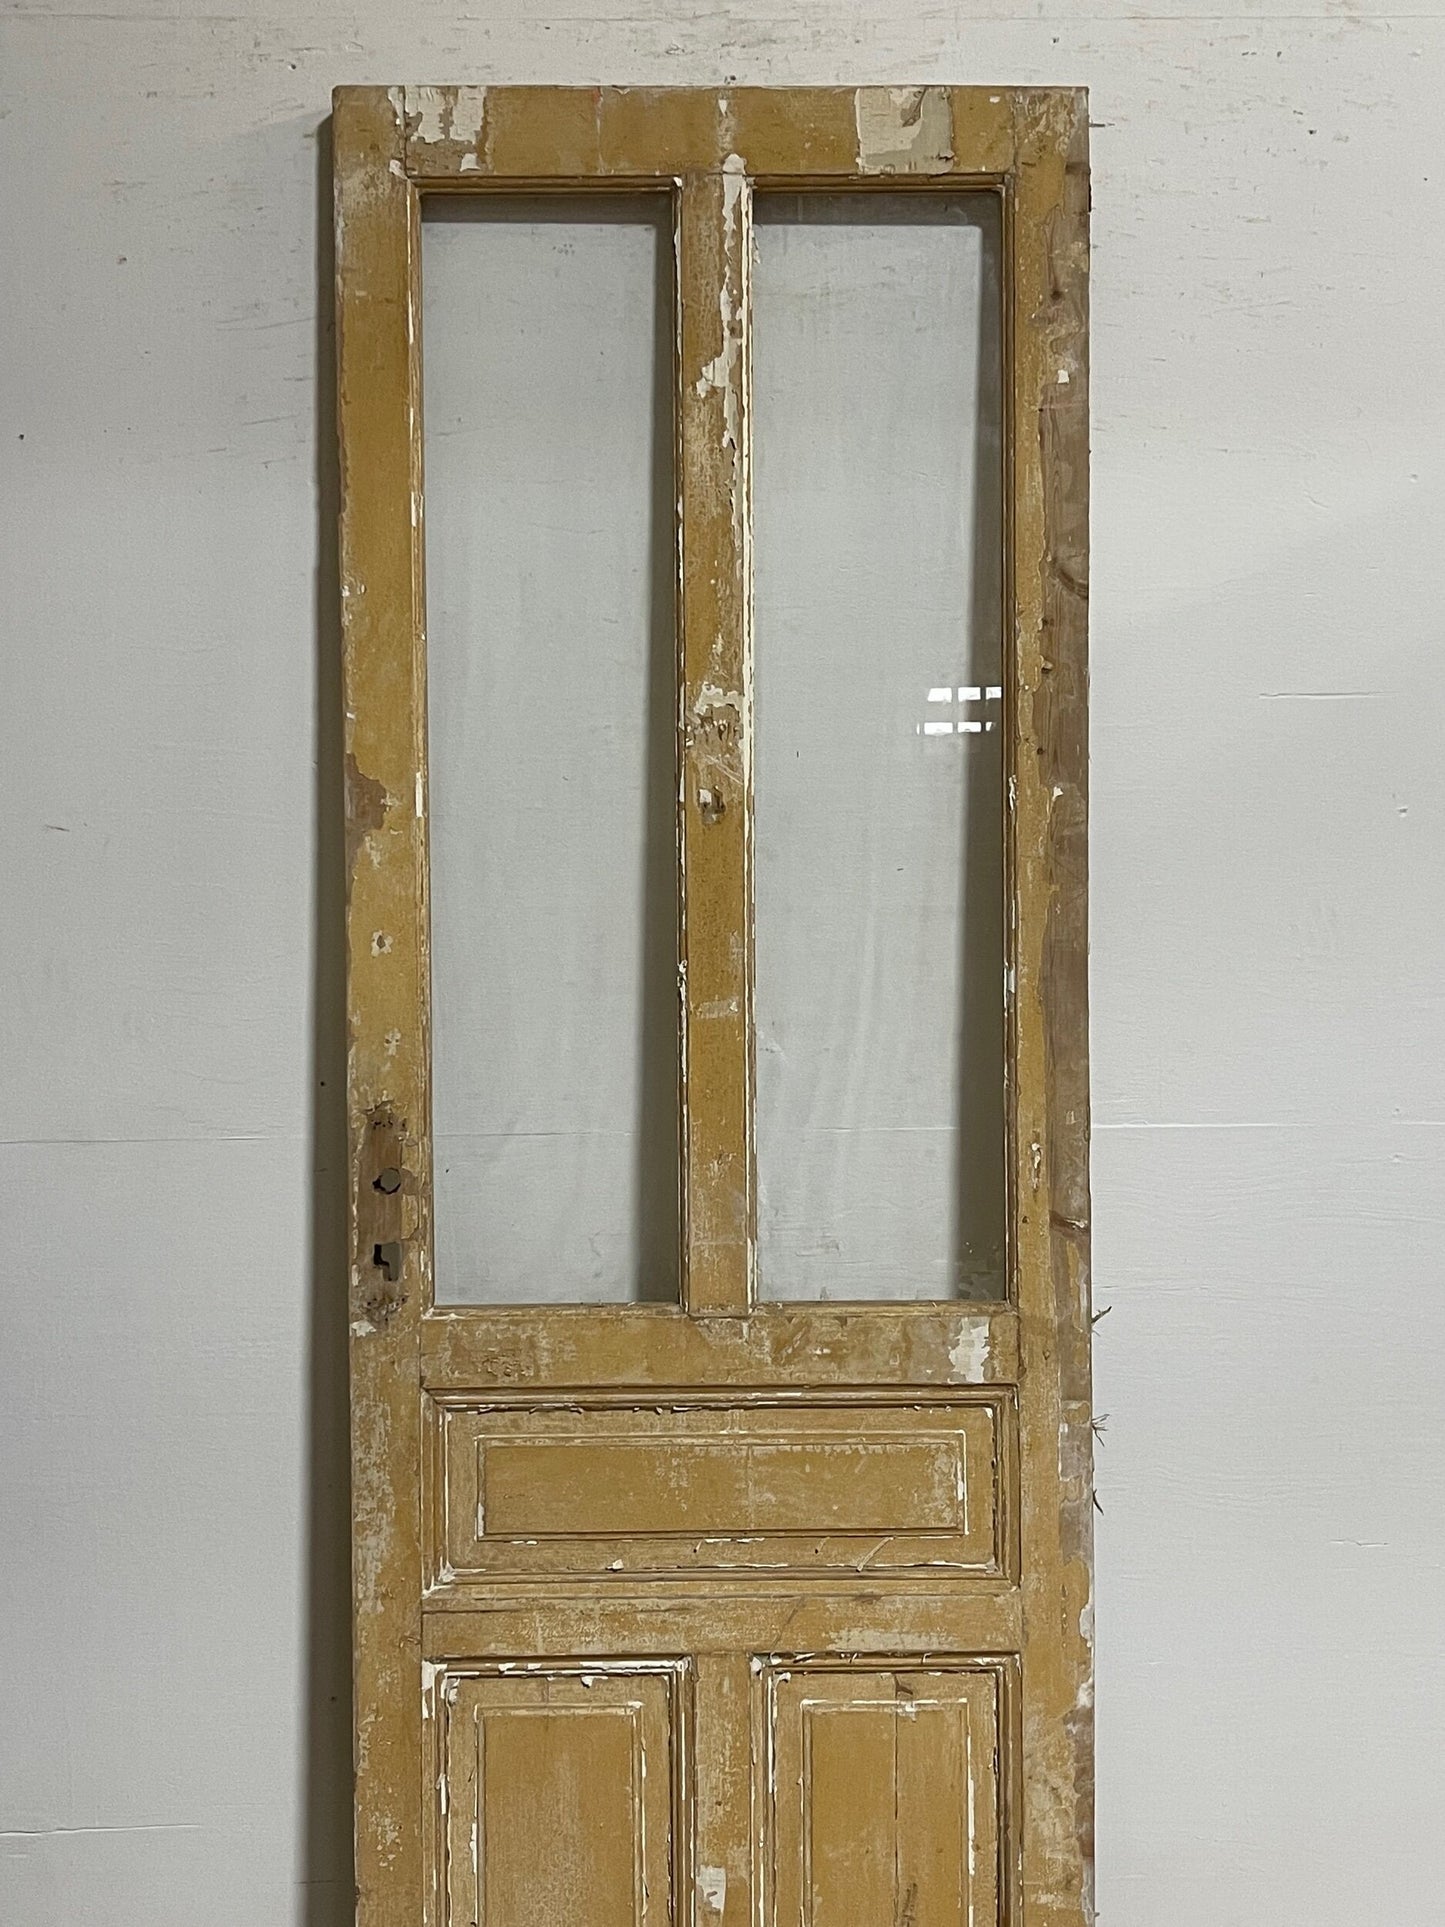 Antique French door with glass  (92.5x31.75) H0184s